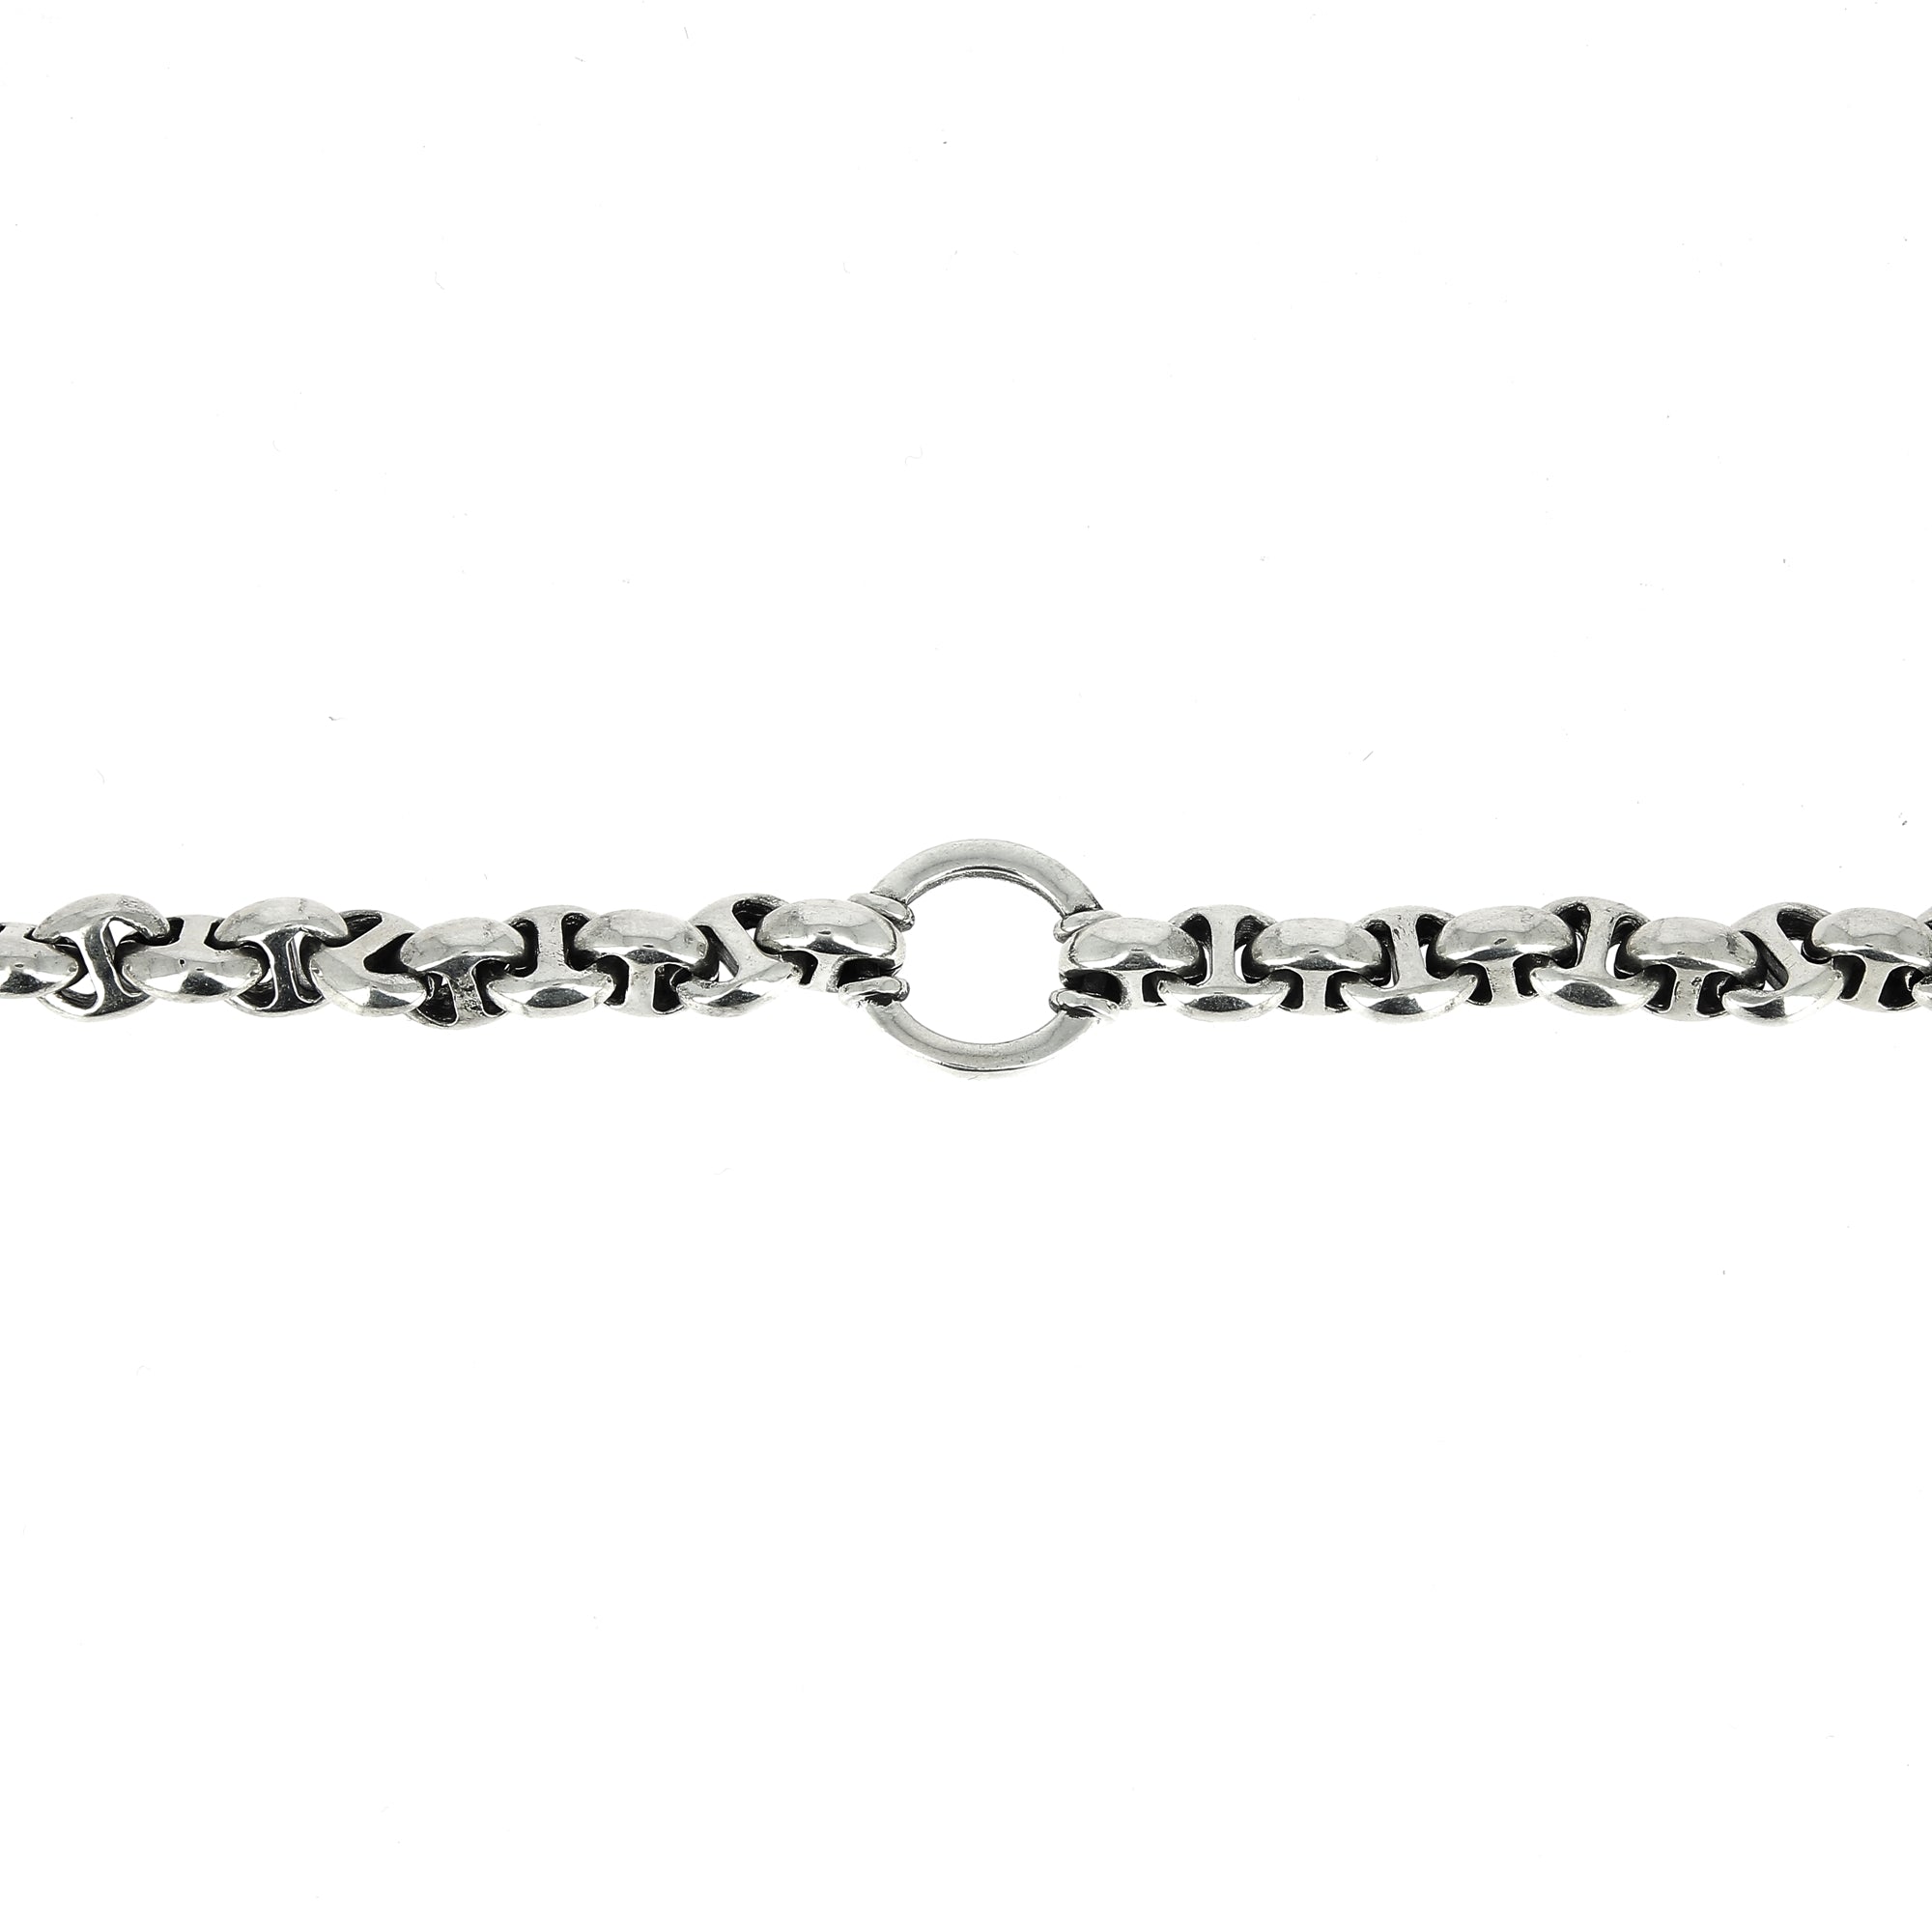 10mm Open Link Necklace with Diamonds